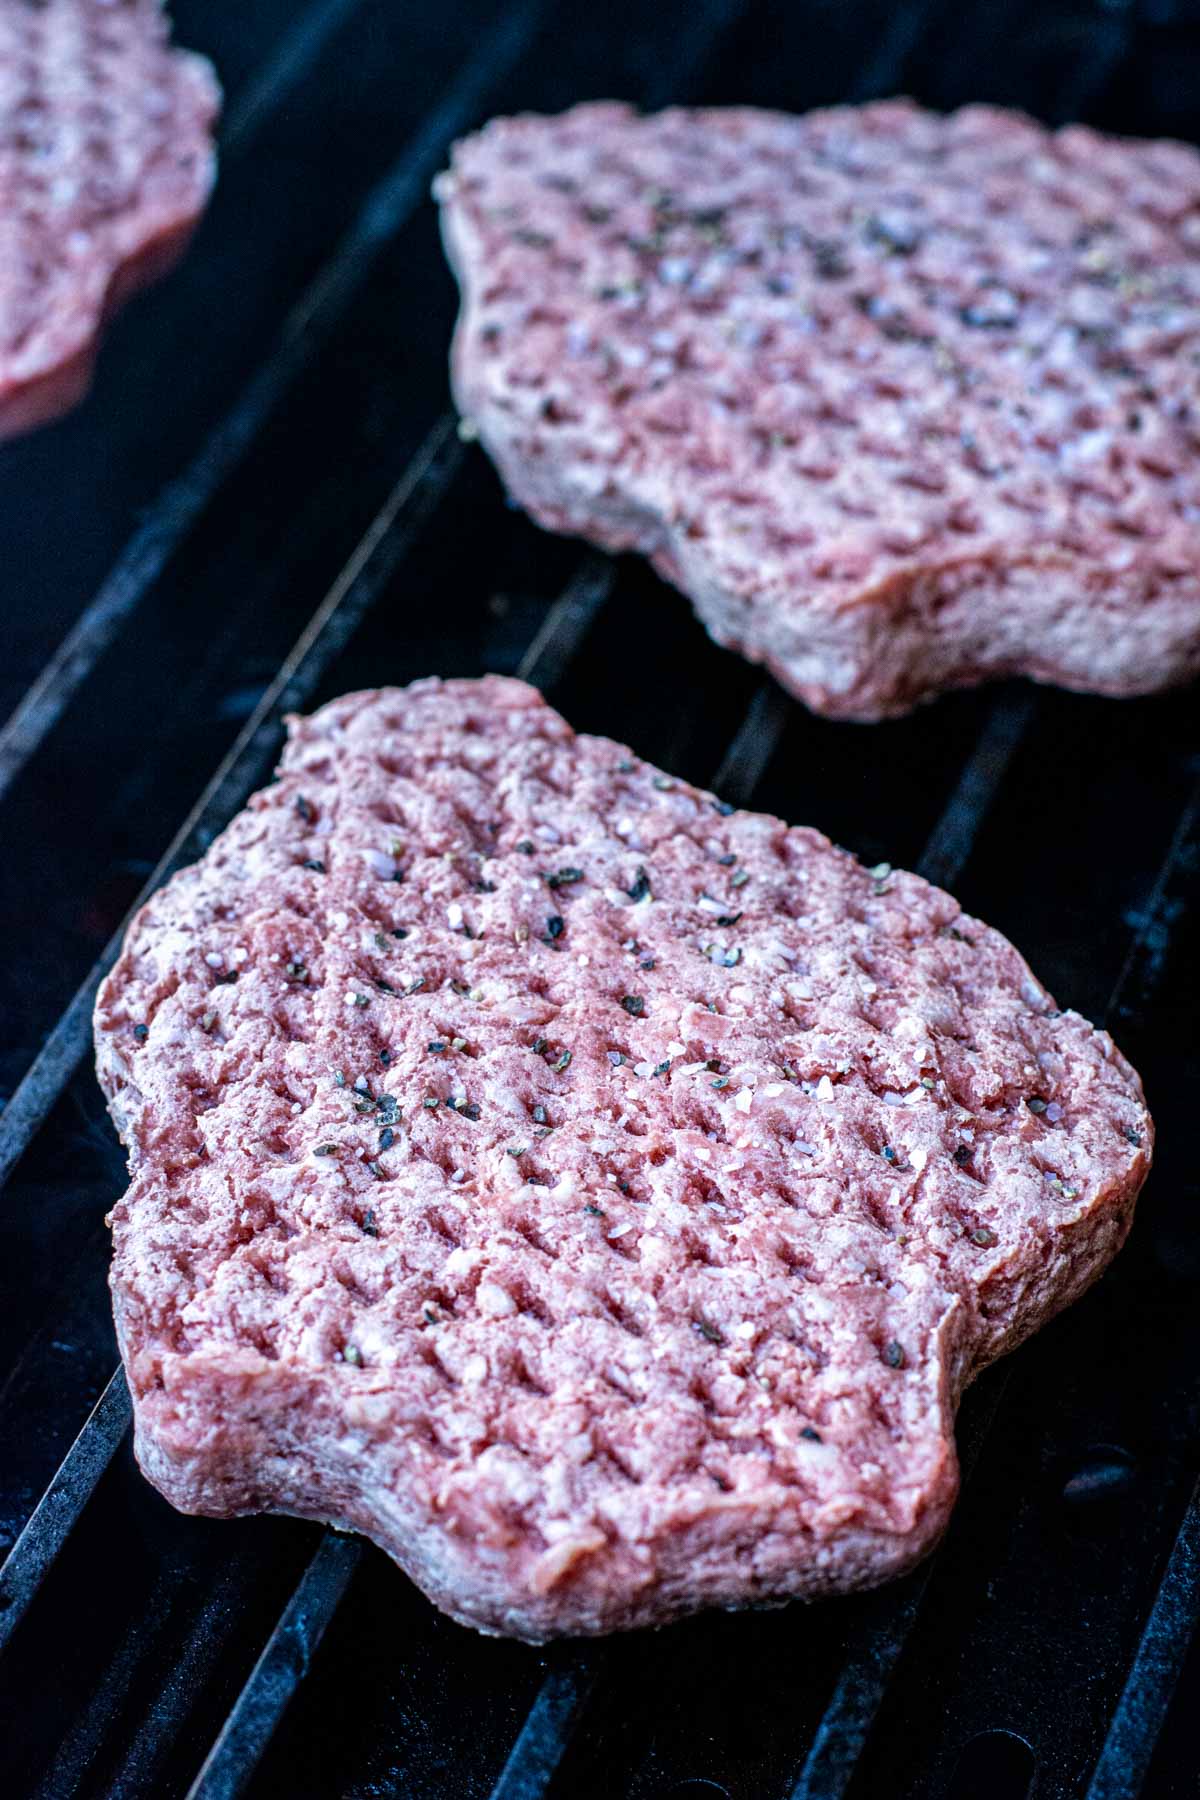 Raw frozen burger patties on the grill.